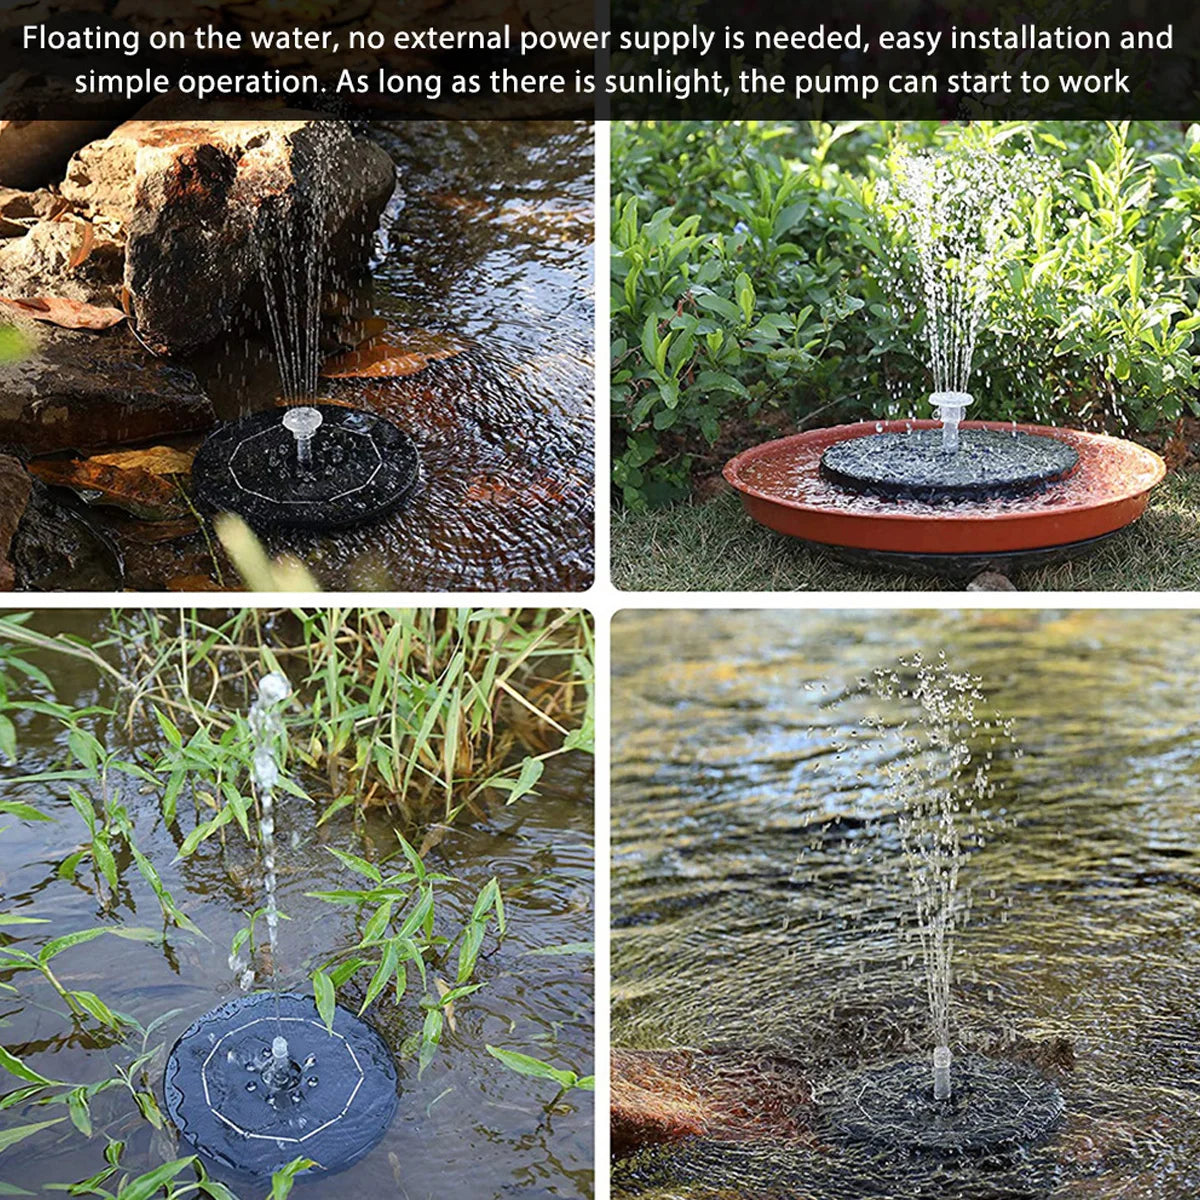 16cm Round Solar Fountain, Solar-powered floating device needs no external power; sunlight energizes pump.